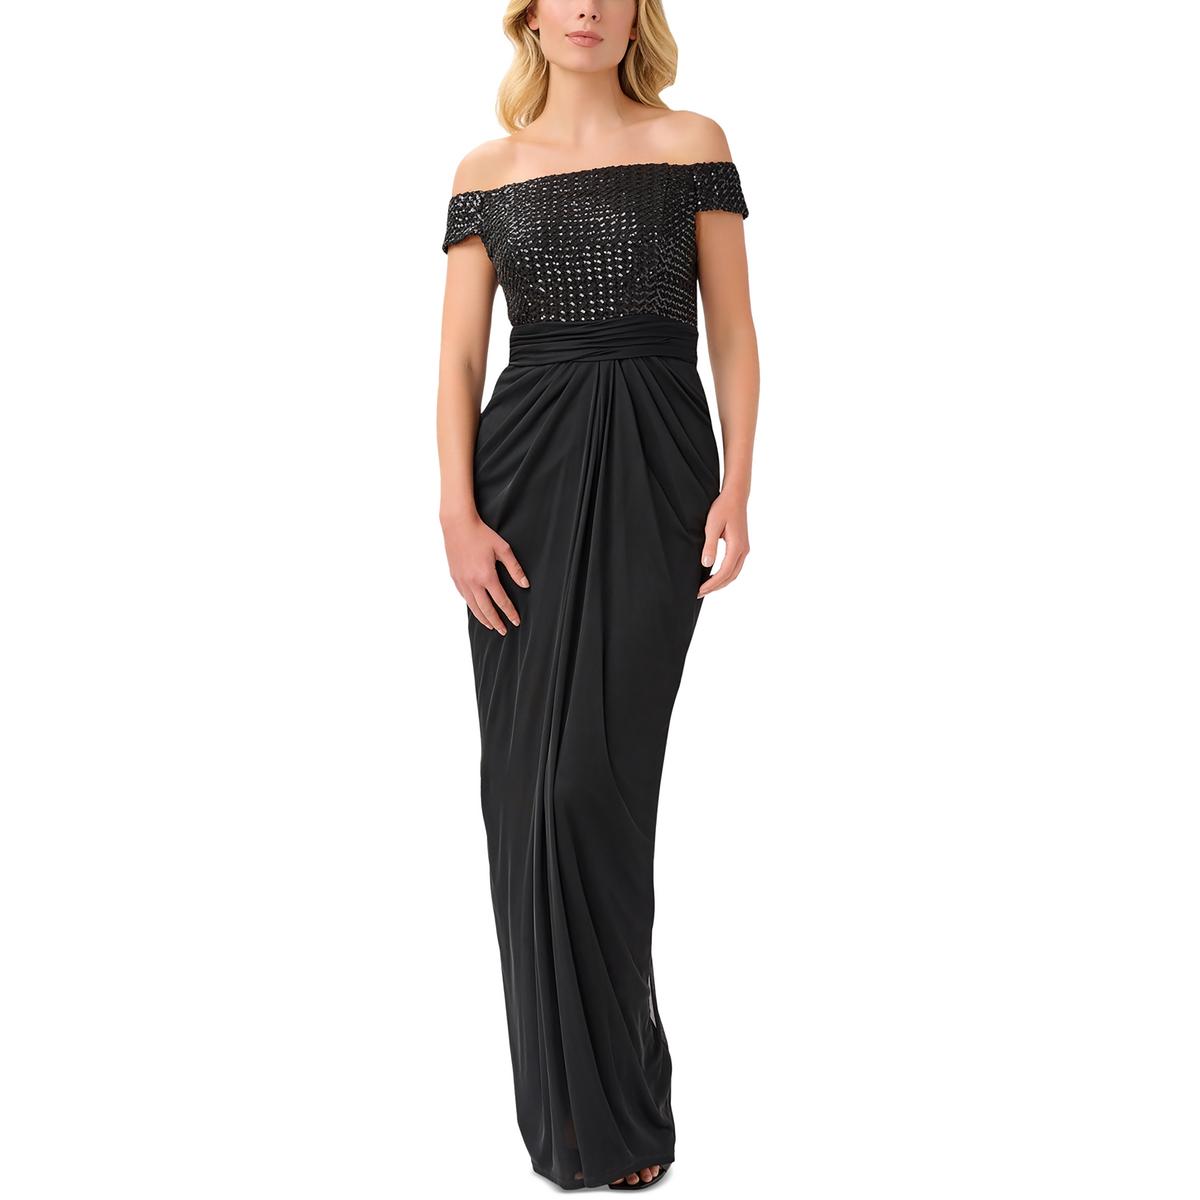 Papell Studio by Adrianna Papell Womens Mesh Off-The-Shoulder Evening Dress